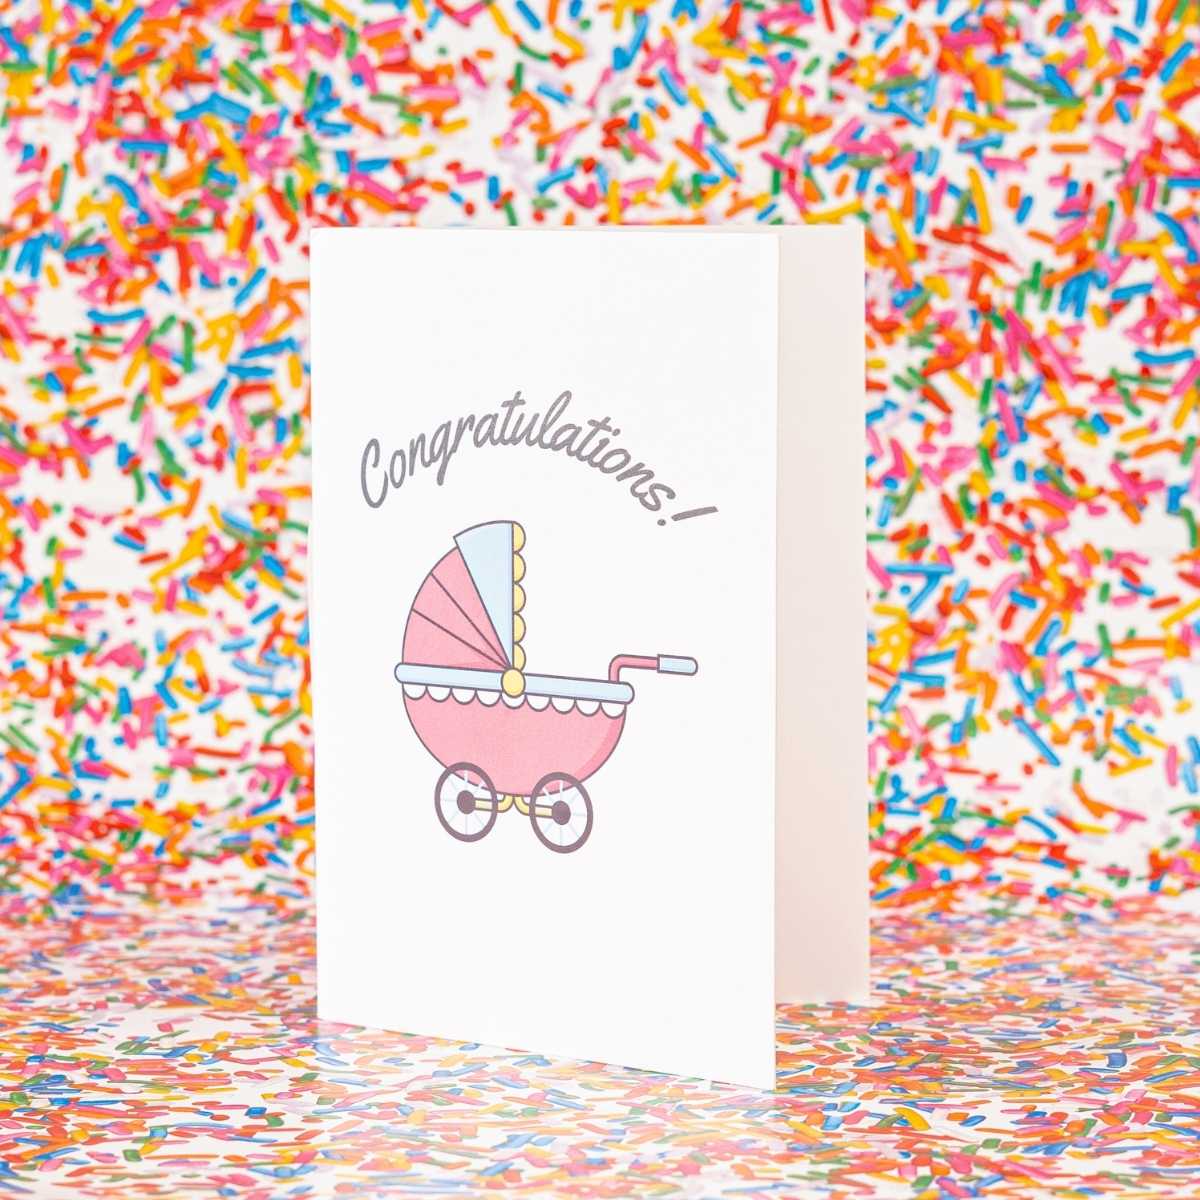 Congratulations on the New Baby! - Never-Ending Crying Baby Prank Greeting Card - DickAtYourDoor